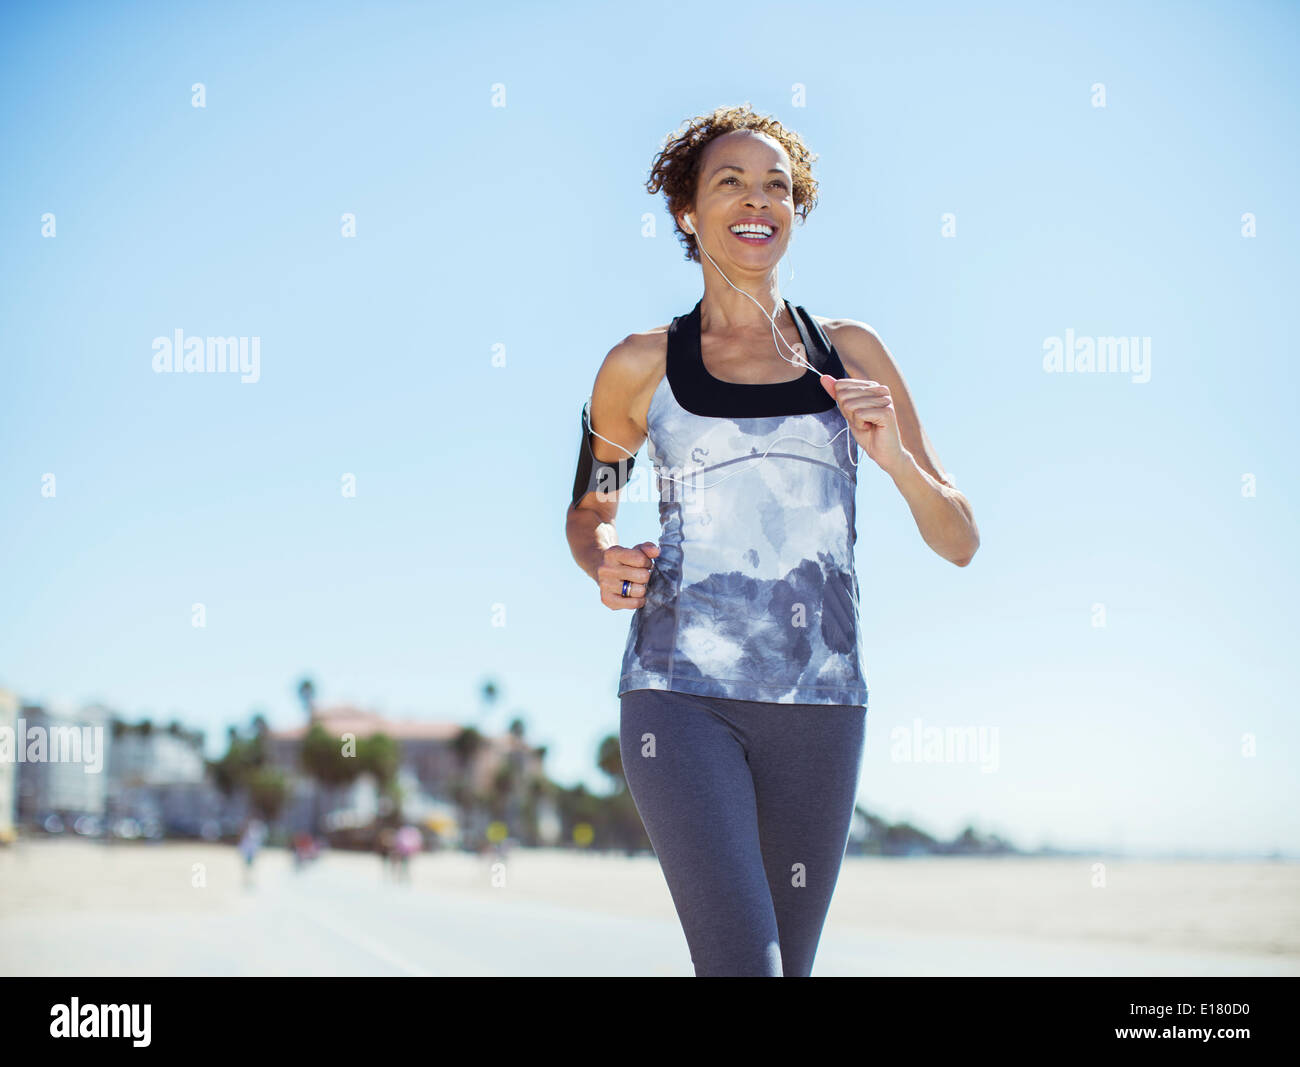 Woman running on beach Banque D'Images